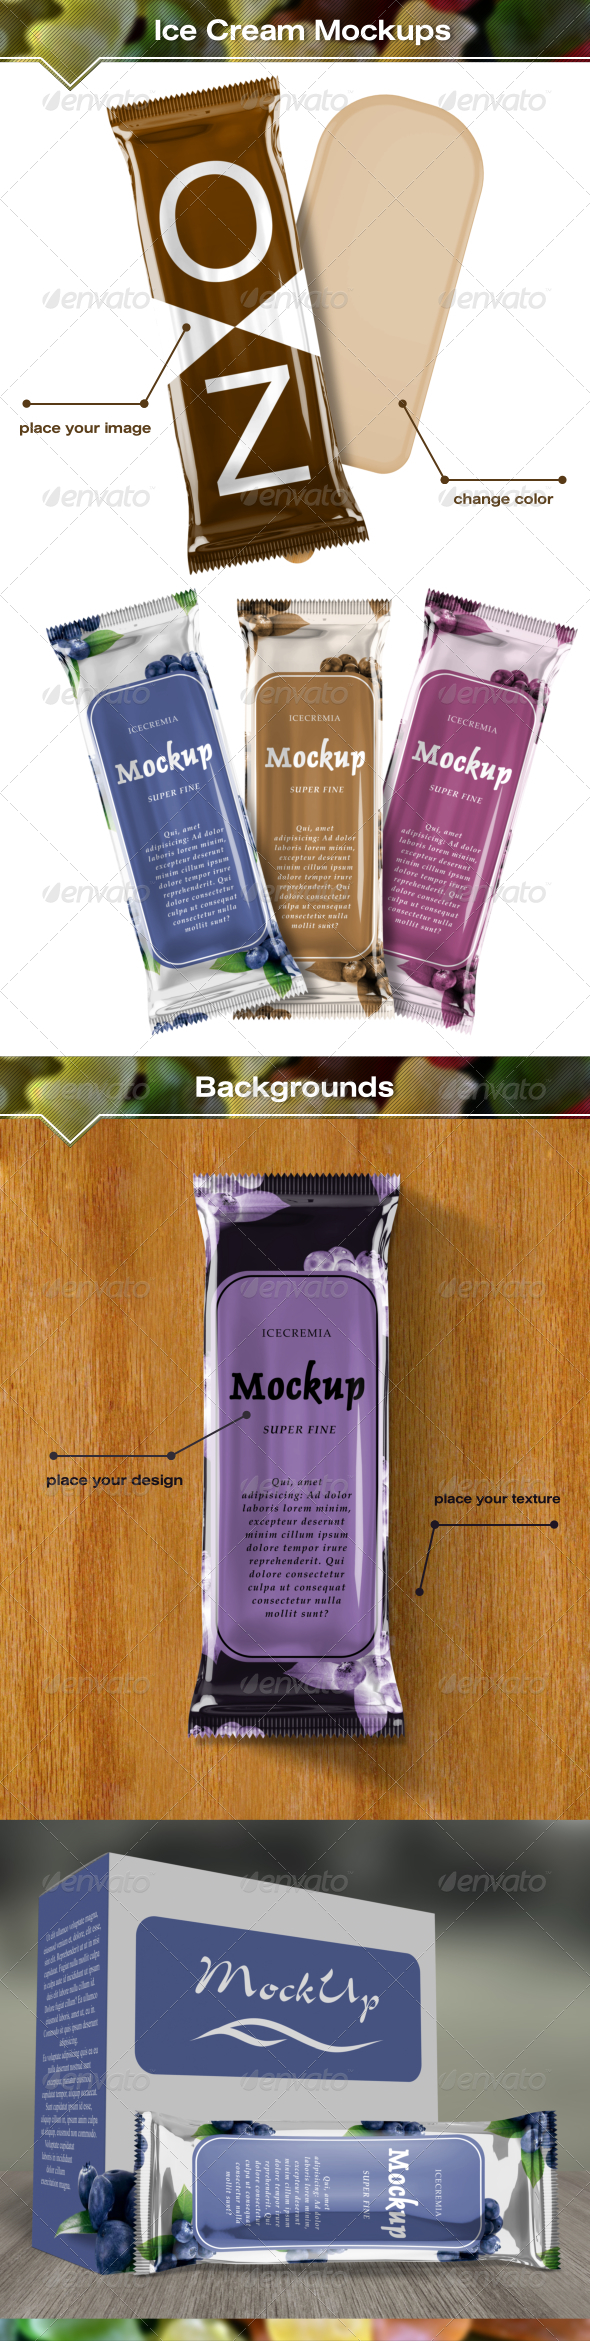 Download Ice Cream Package Template » Dondrup.com